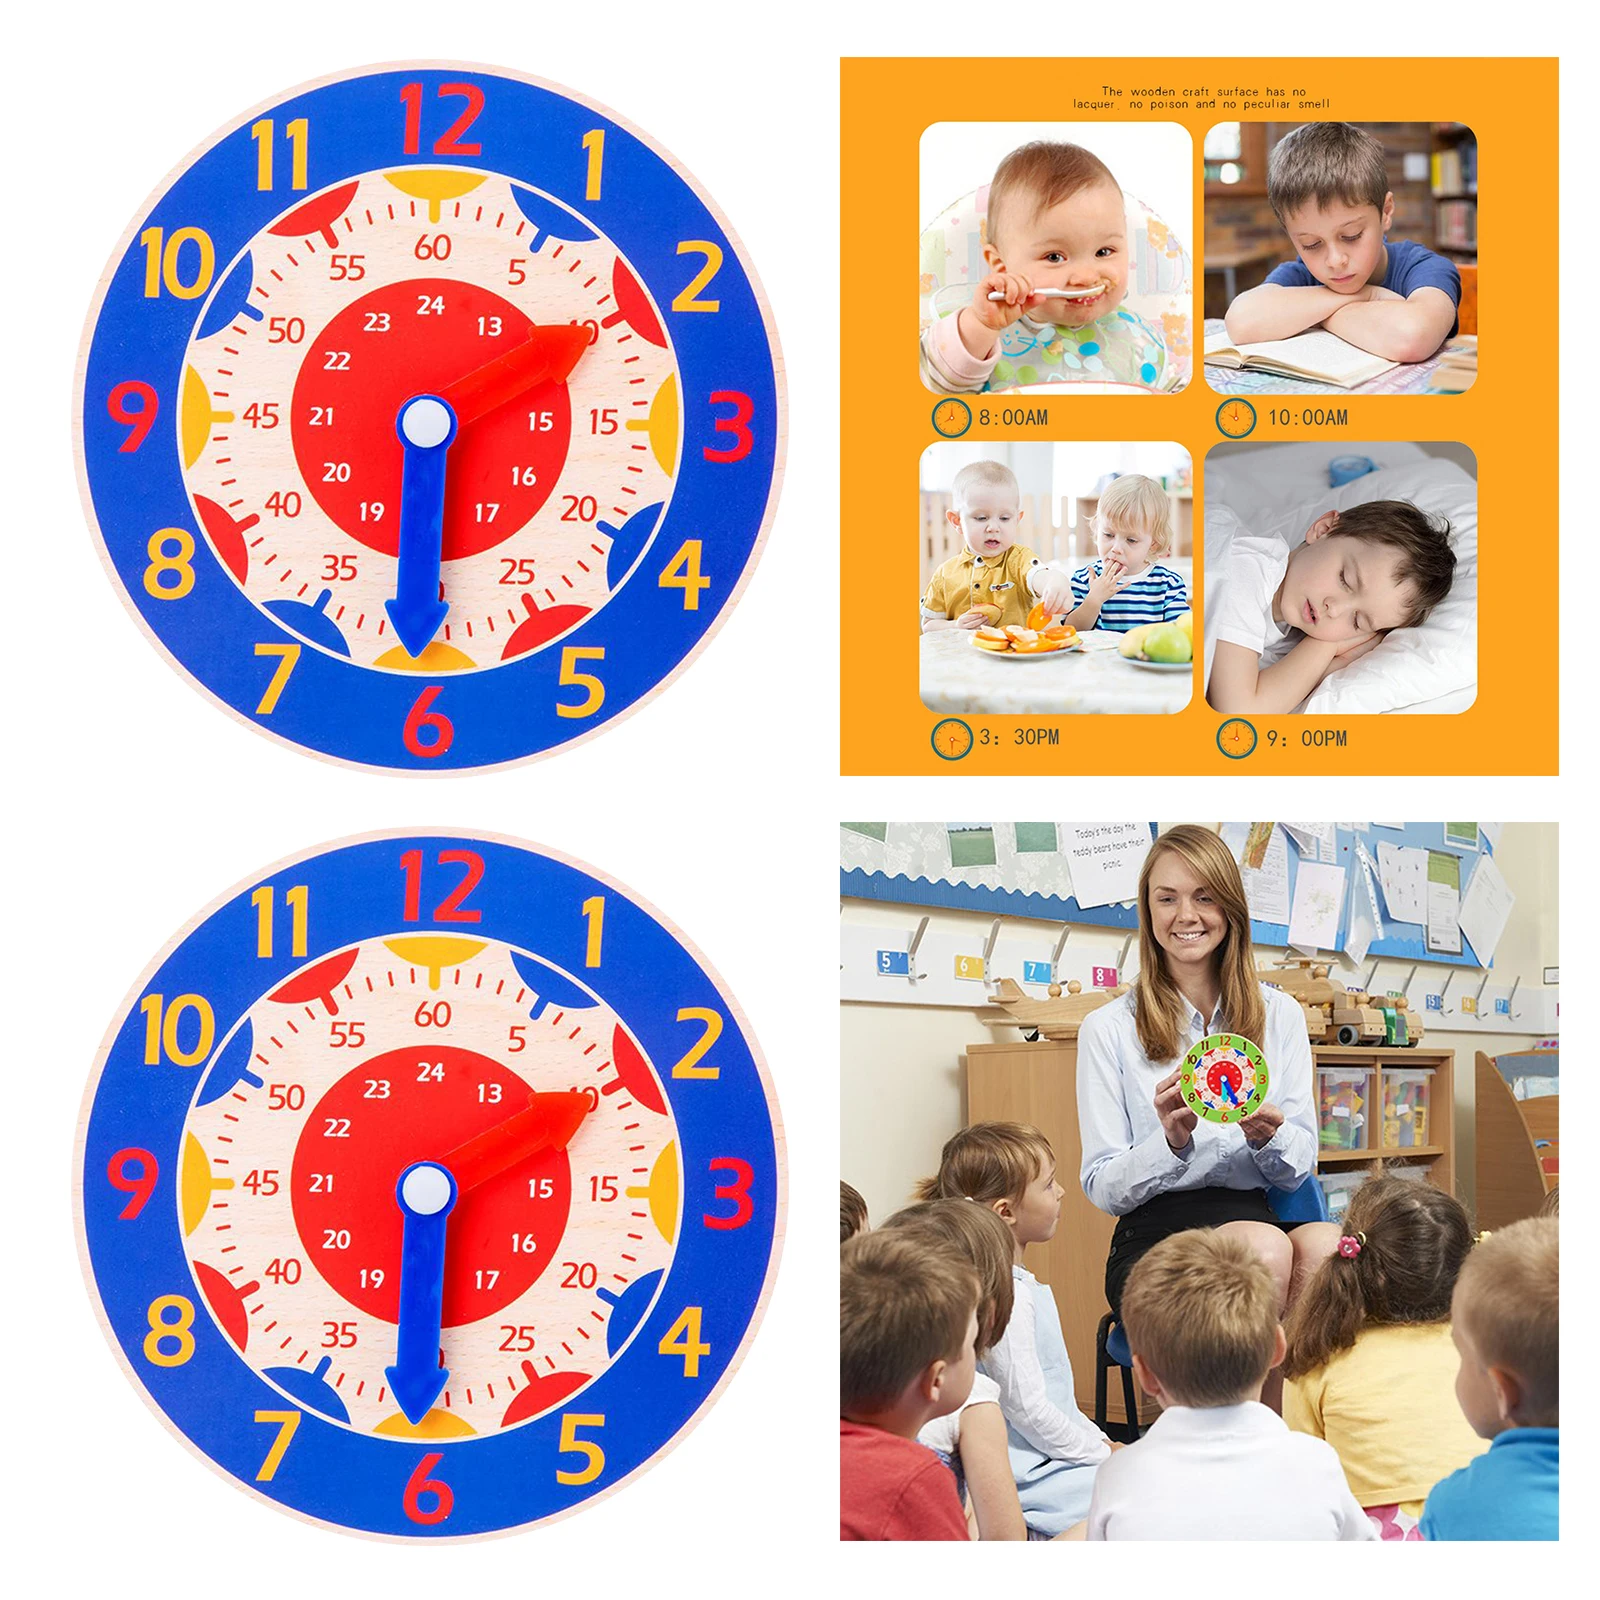 Set of 2 Children Wooden Clock Toy Teaching Aids Toys Gifts Early Supplies